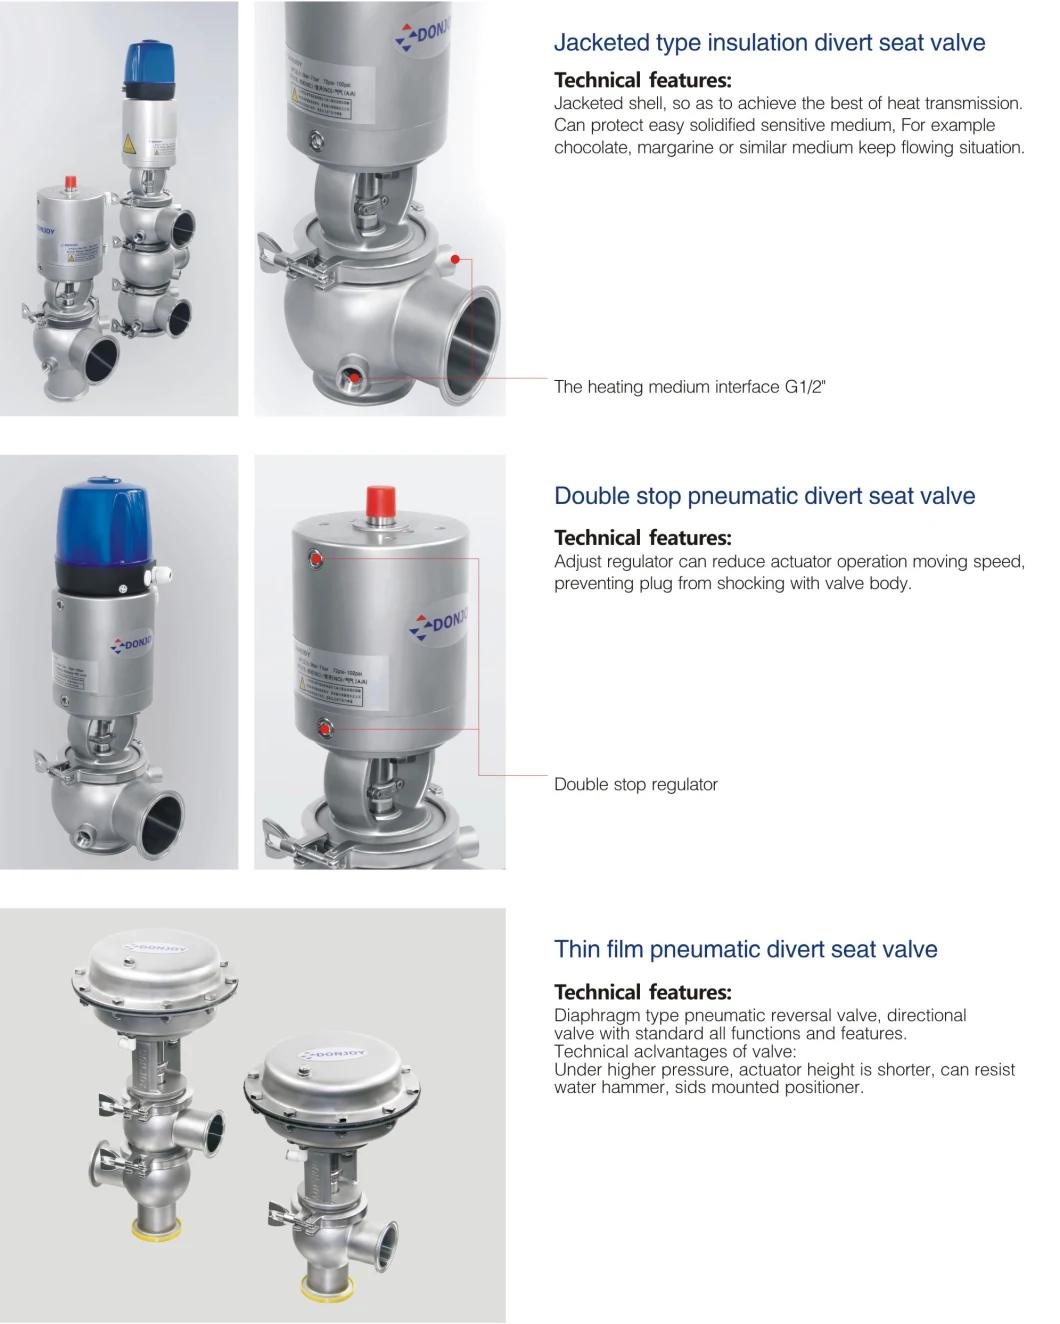 3A Certified Air Operated Shut-off and Diverter Valve